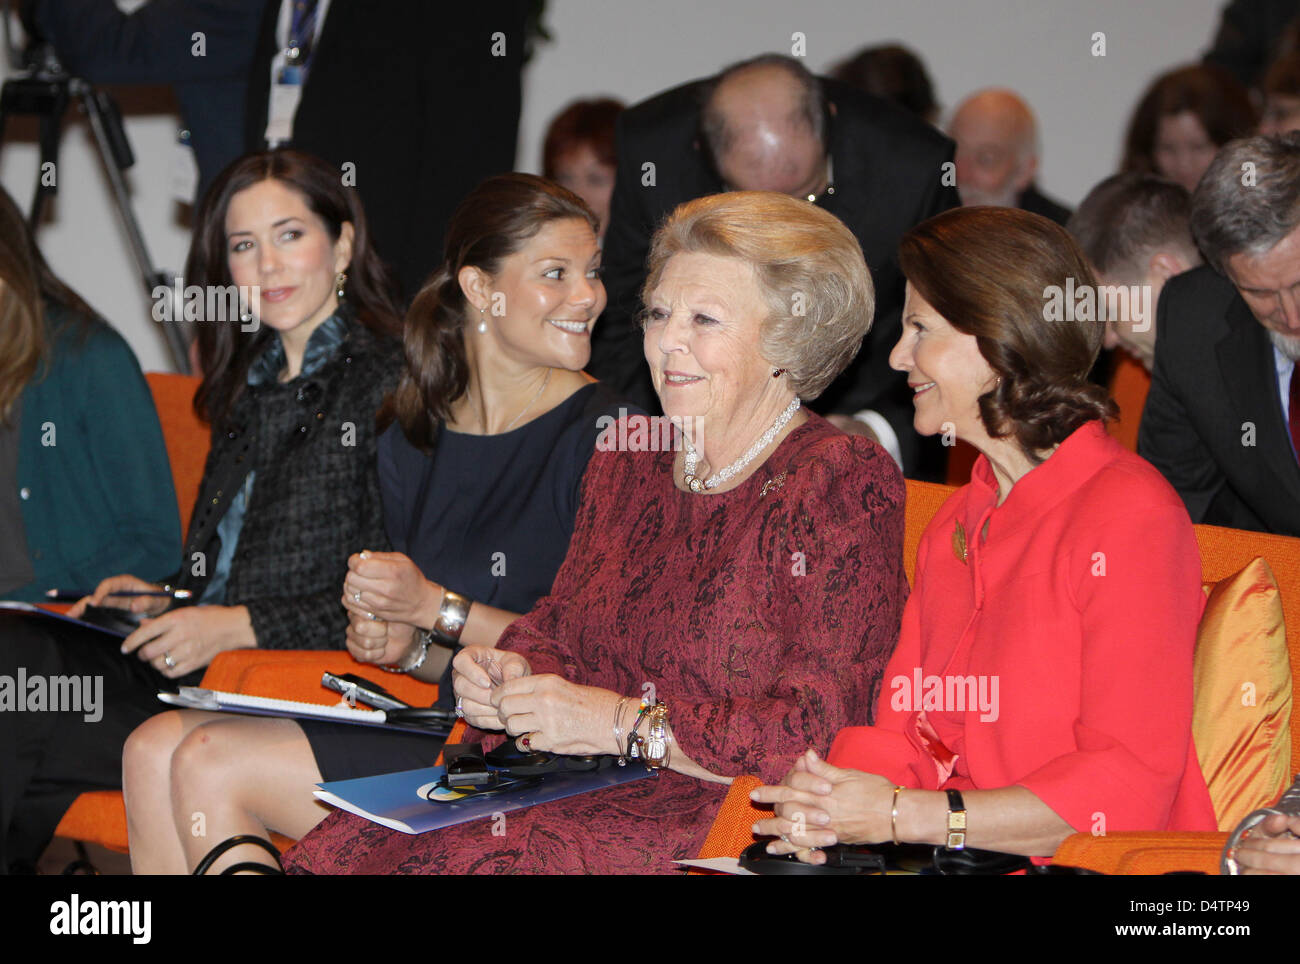 l-r-princess-mary-of-denmark-crown-princess-victoria-of-sweden-queen-D4TP49.jpg